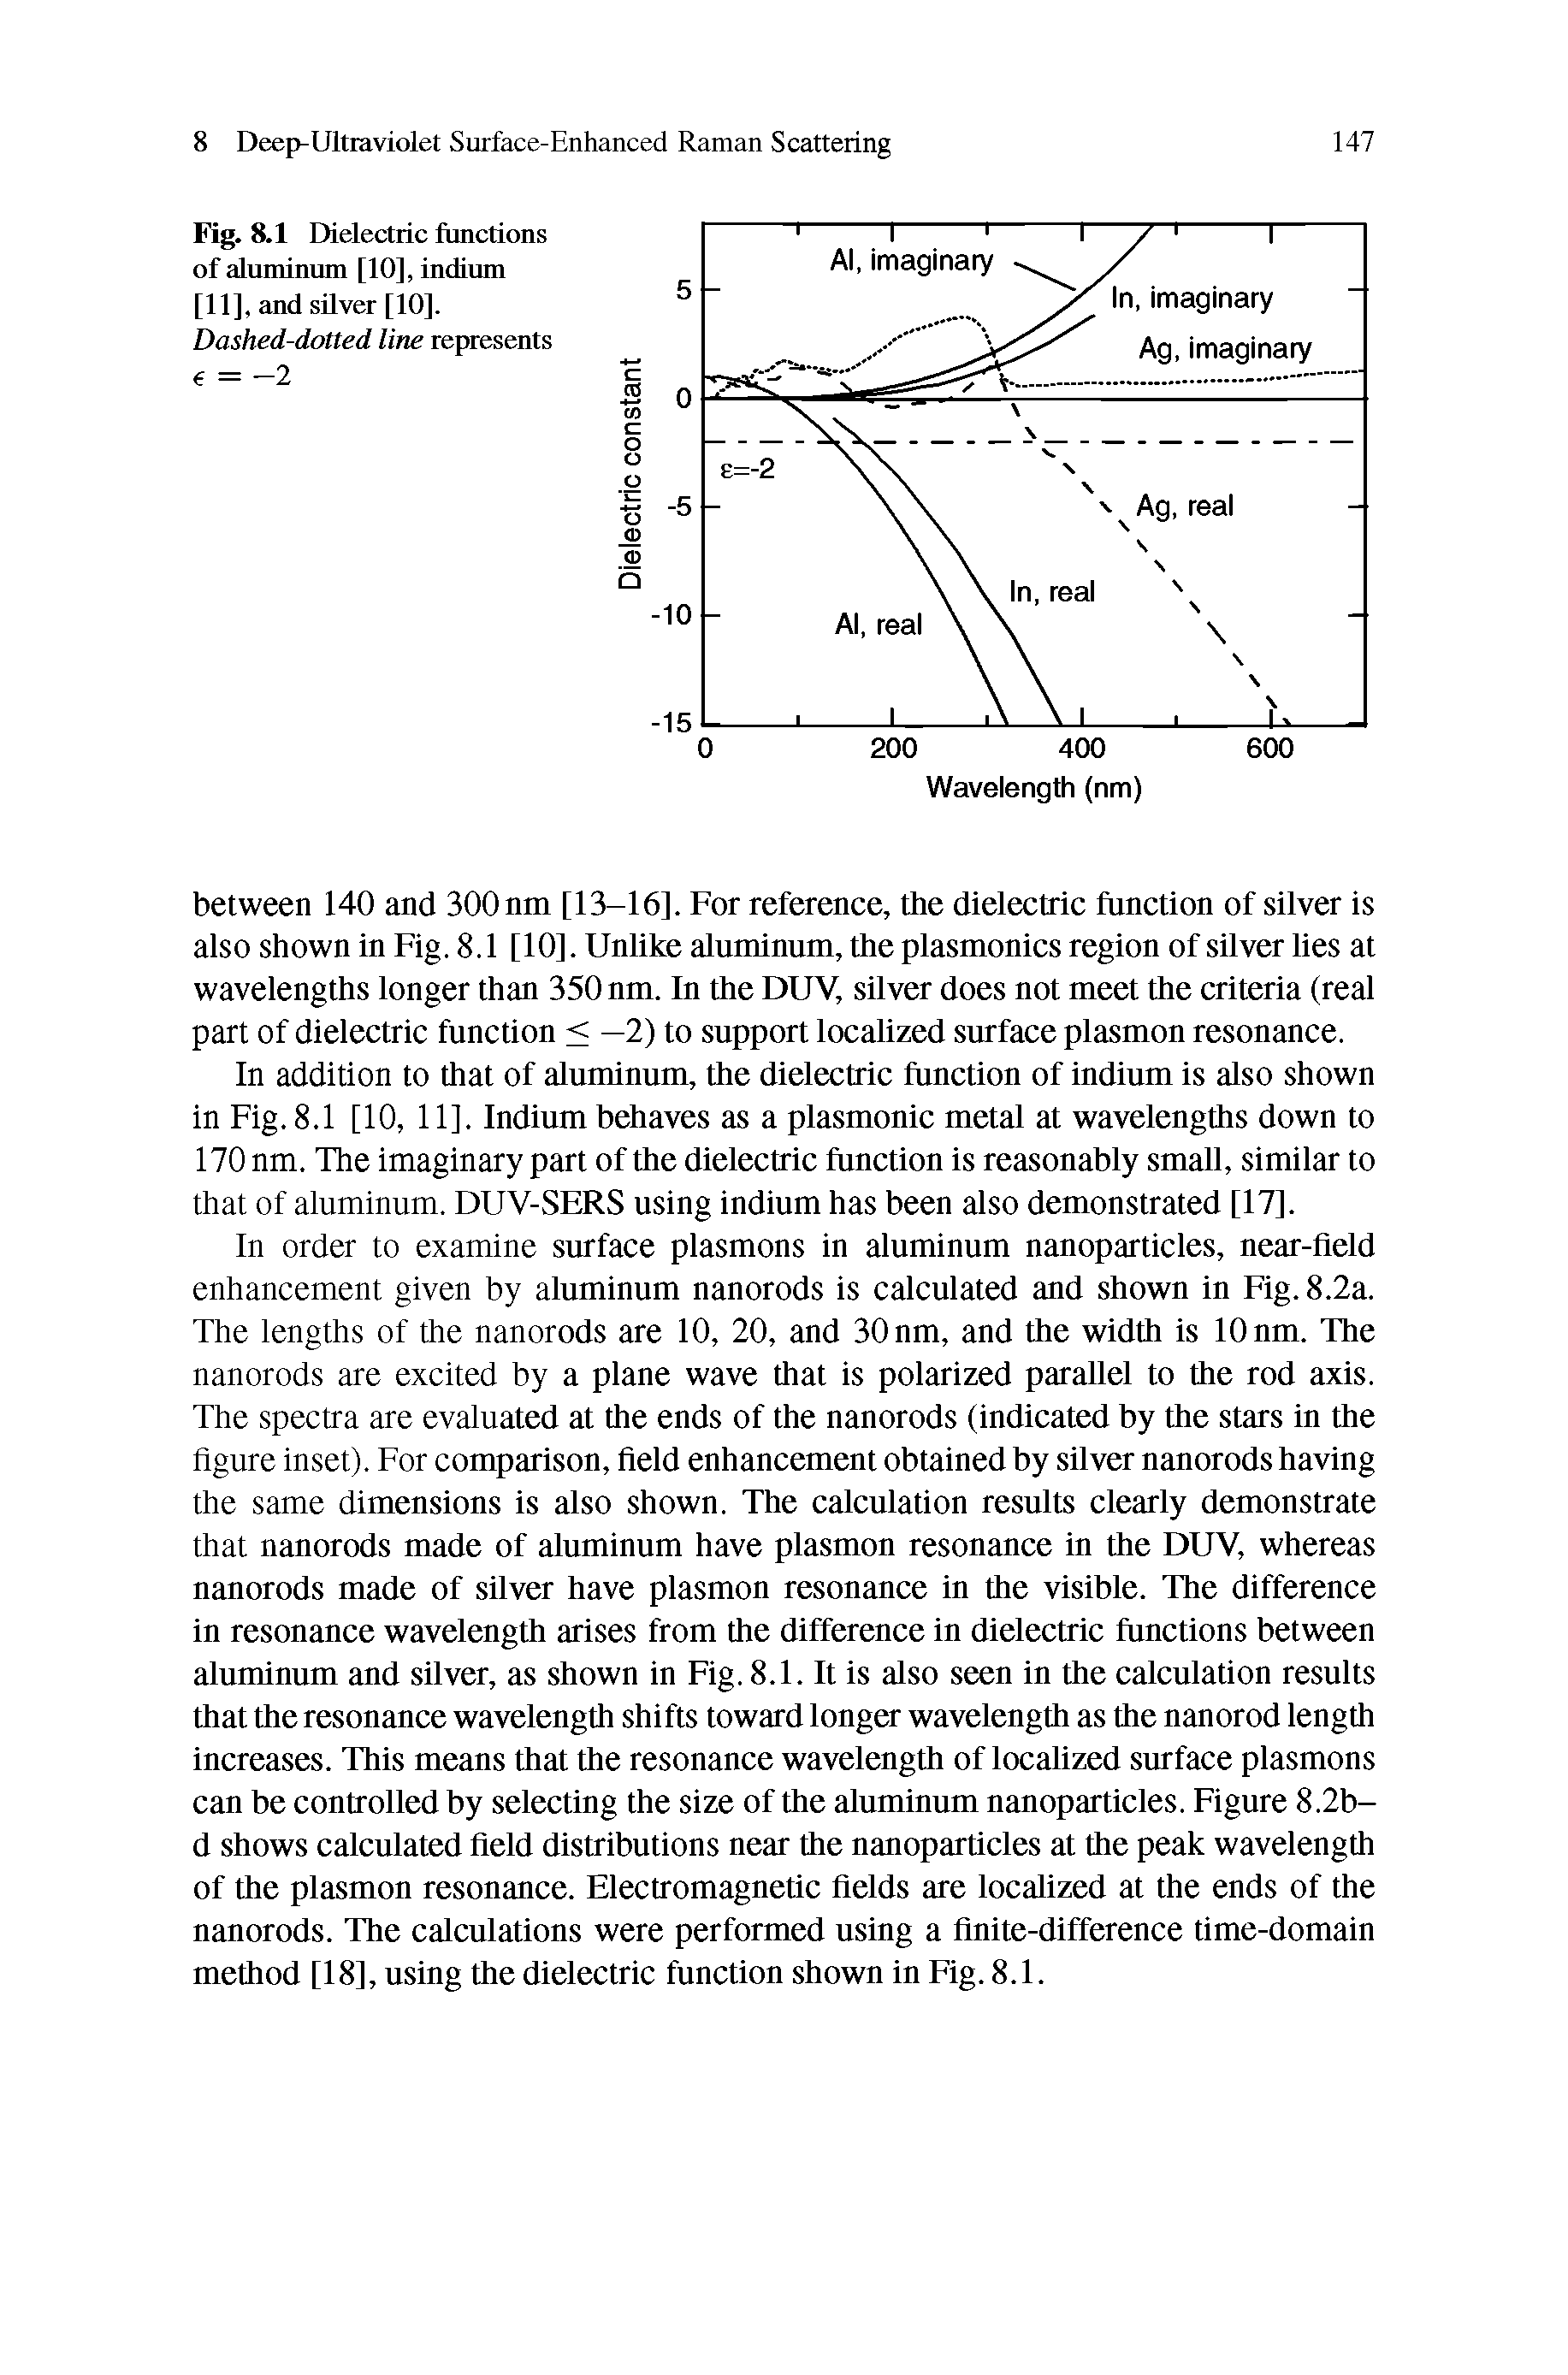 Fig. 8.1 Dielectric functions of aluminum [10], indium [11], and silver [10]. Dashed-dotted line represents = -2...